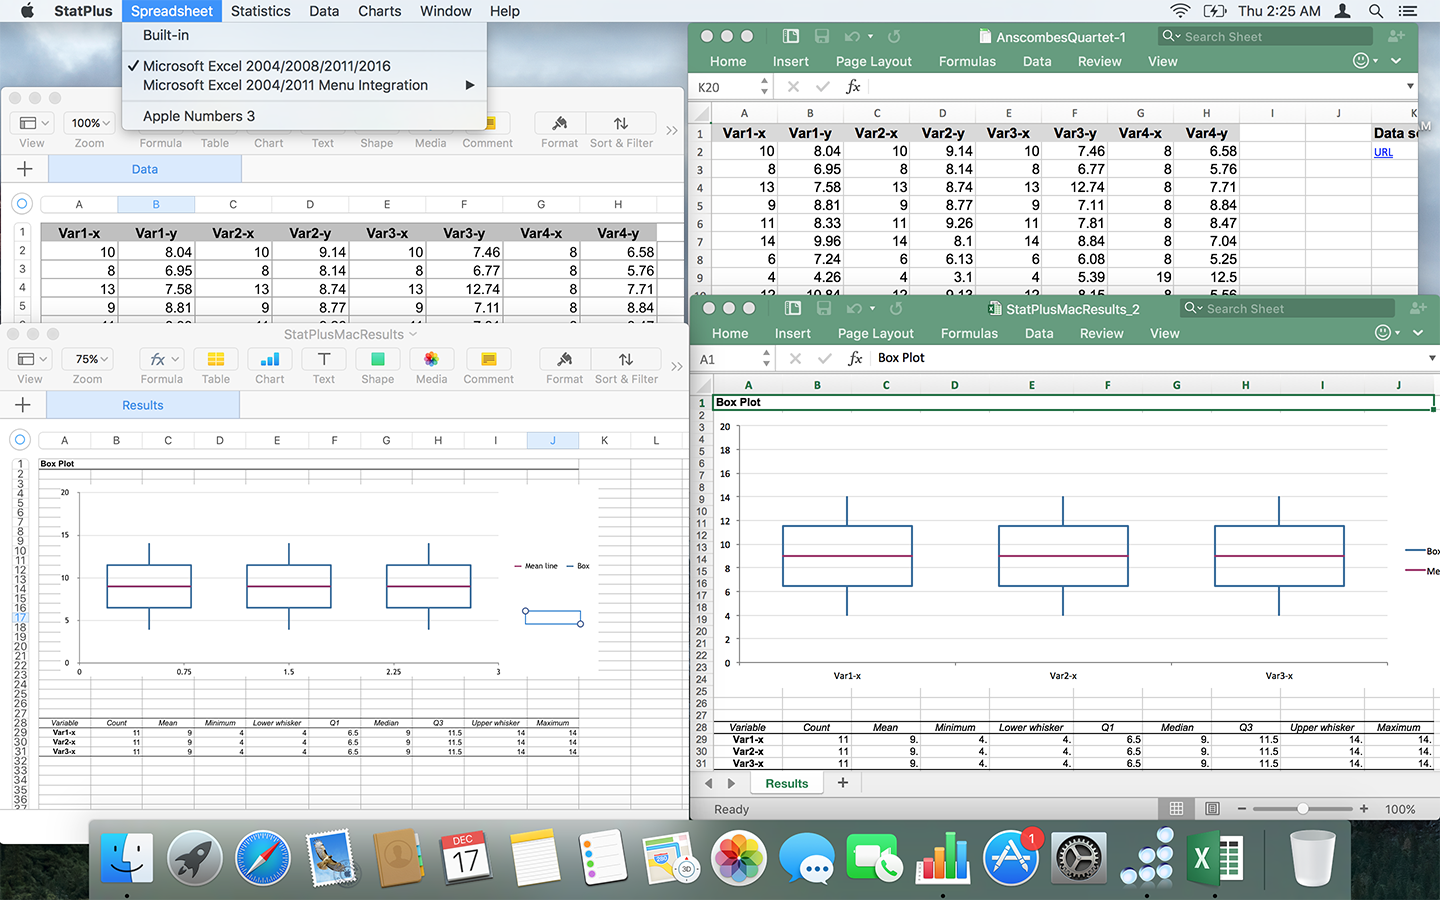 use data analysis toolpak in excel for mac